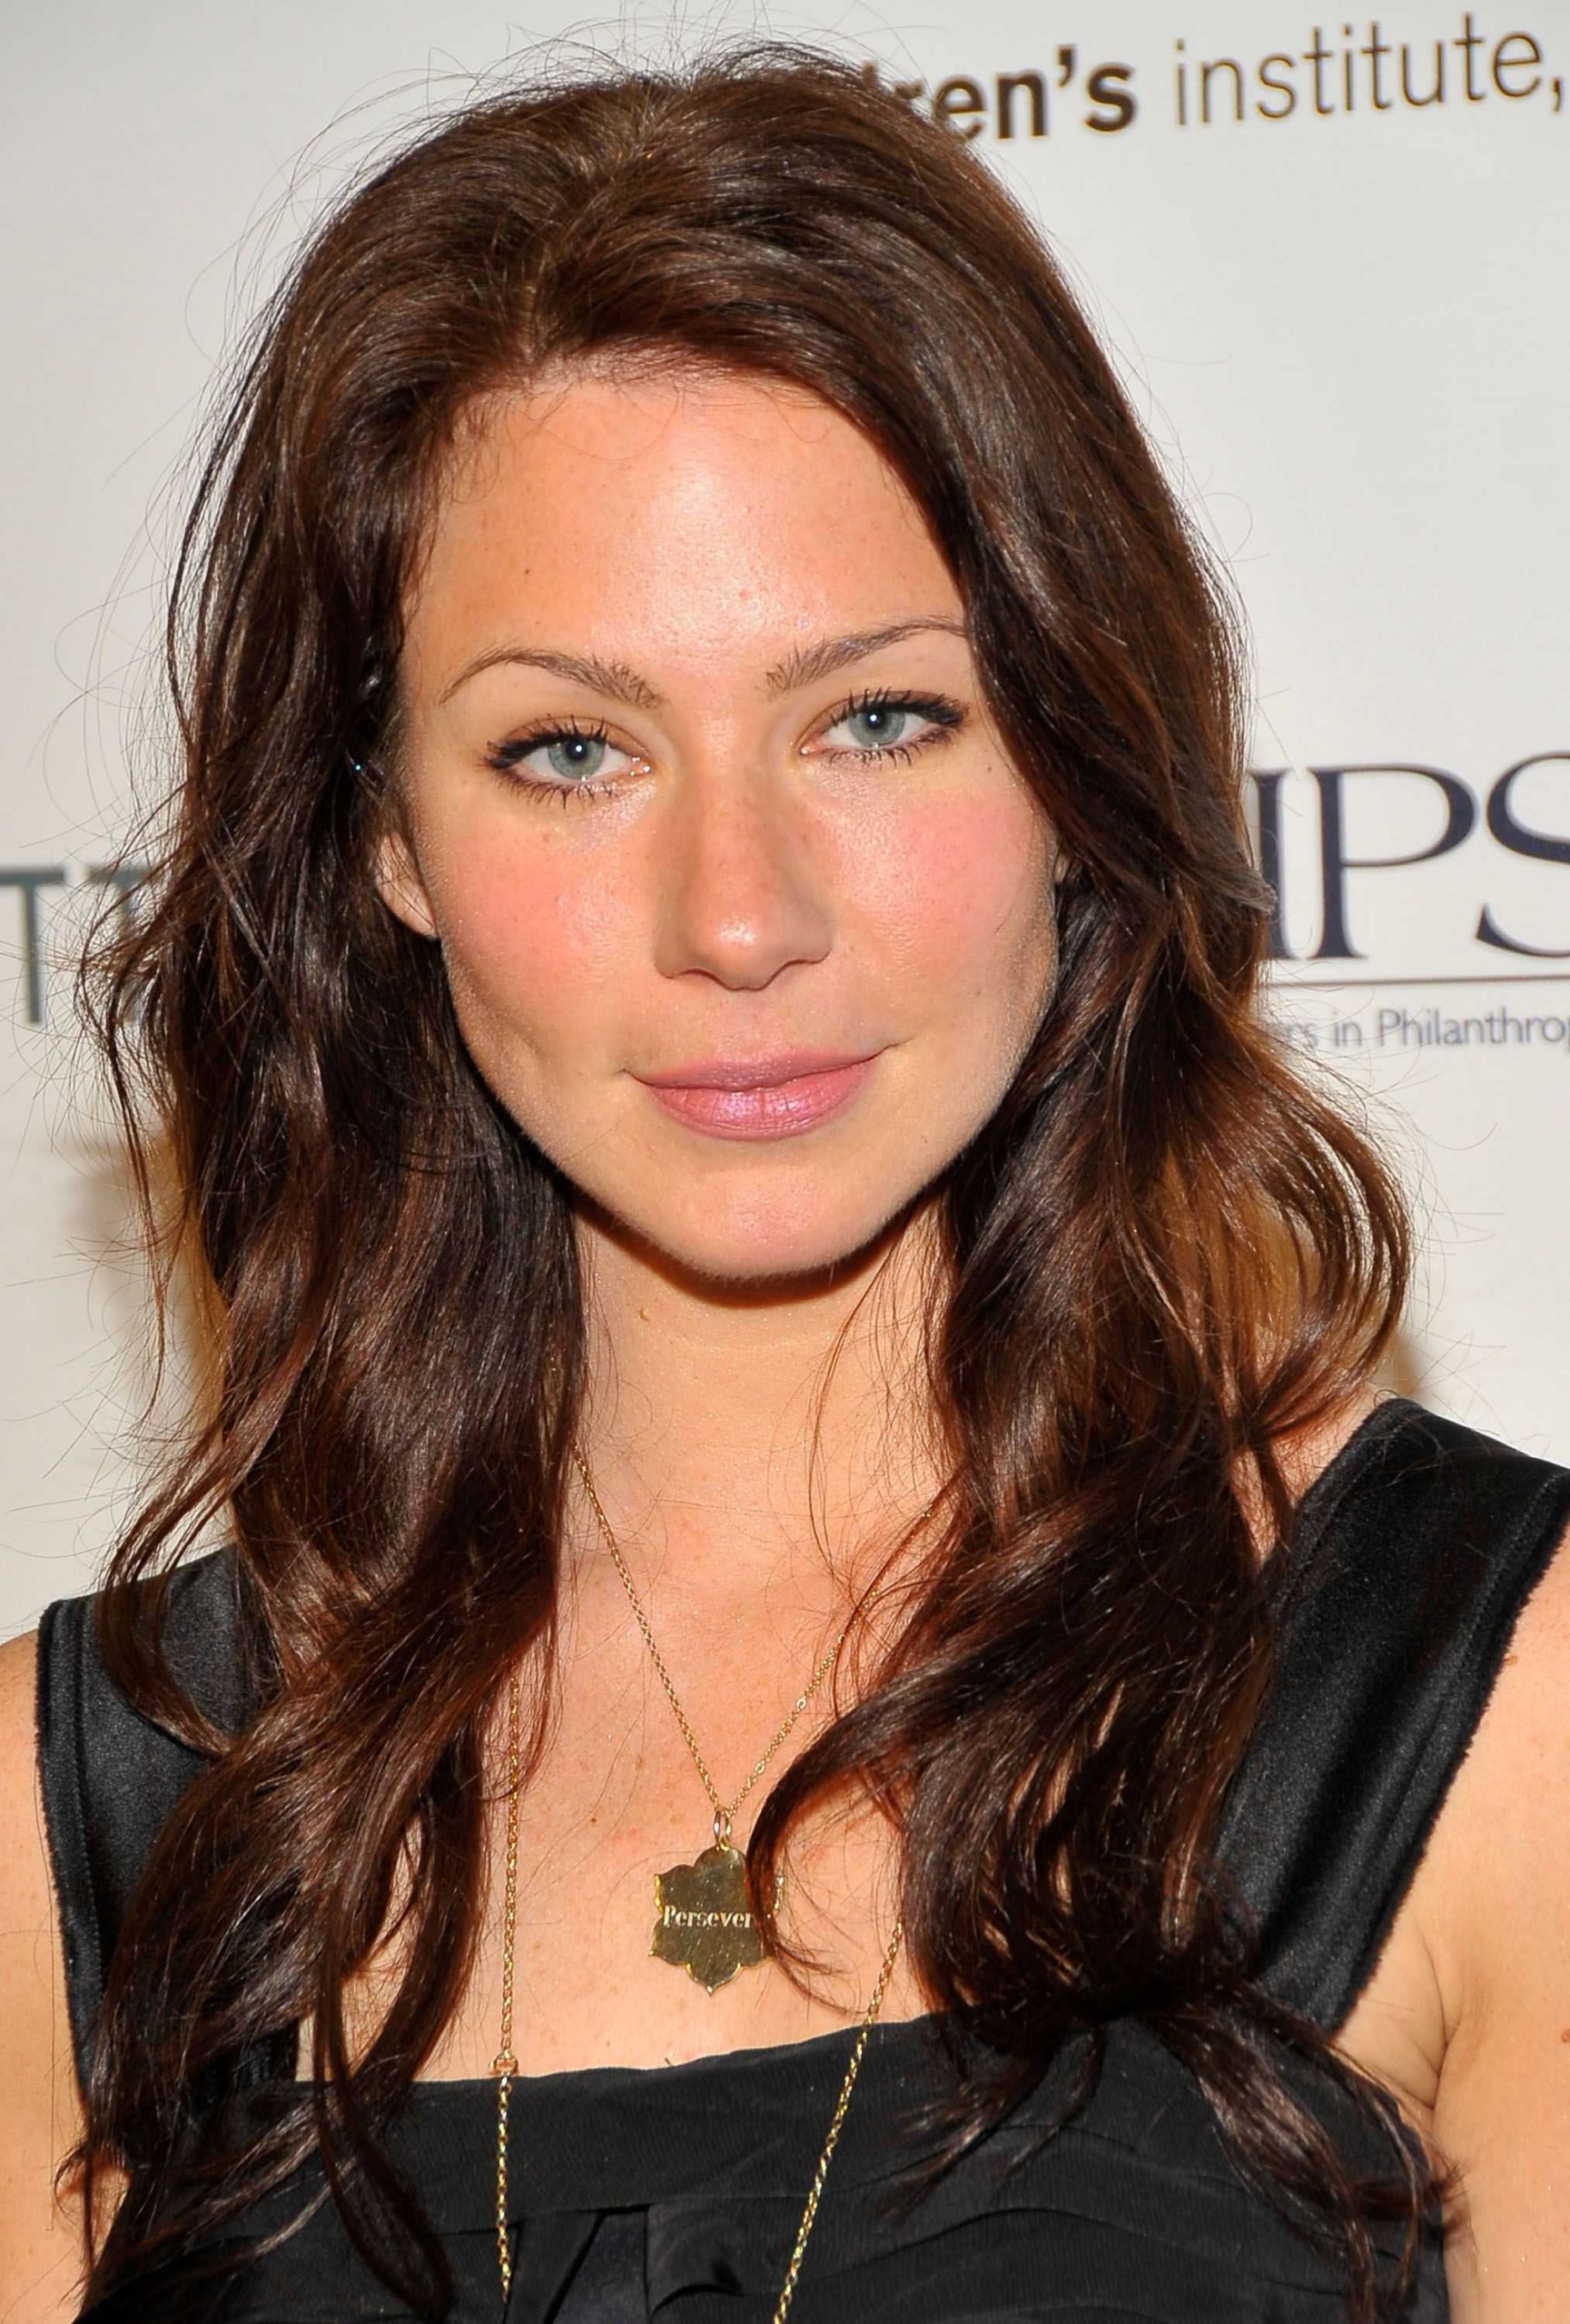 70+ Hot Pictures Of Lynn Collins Expose Her Smokin Hot Body 202